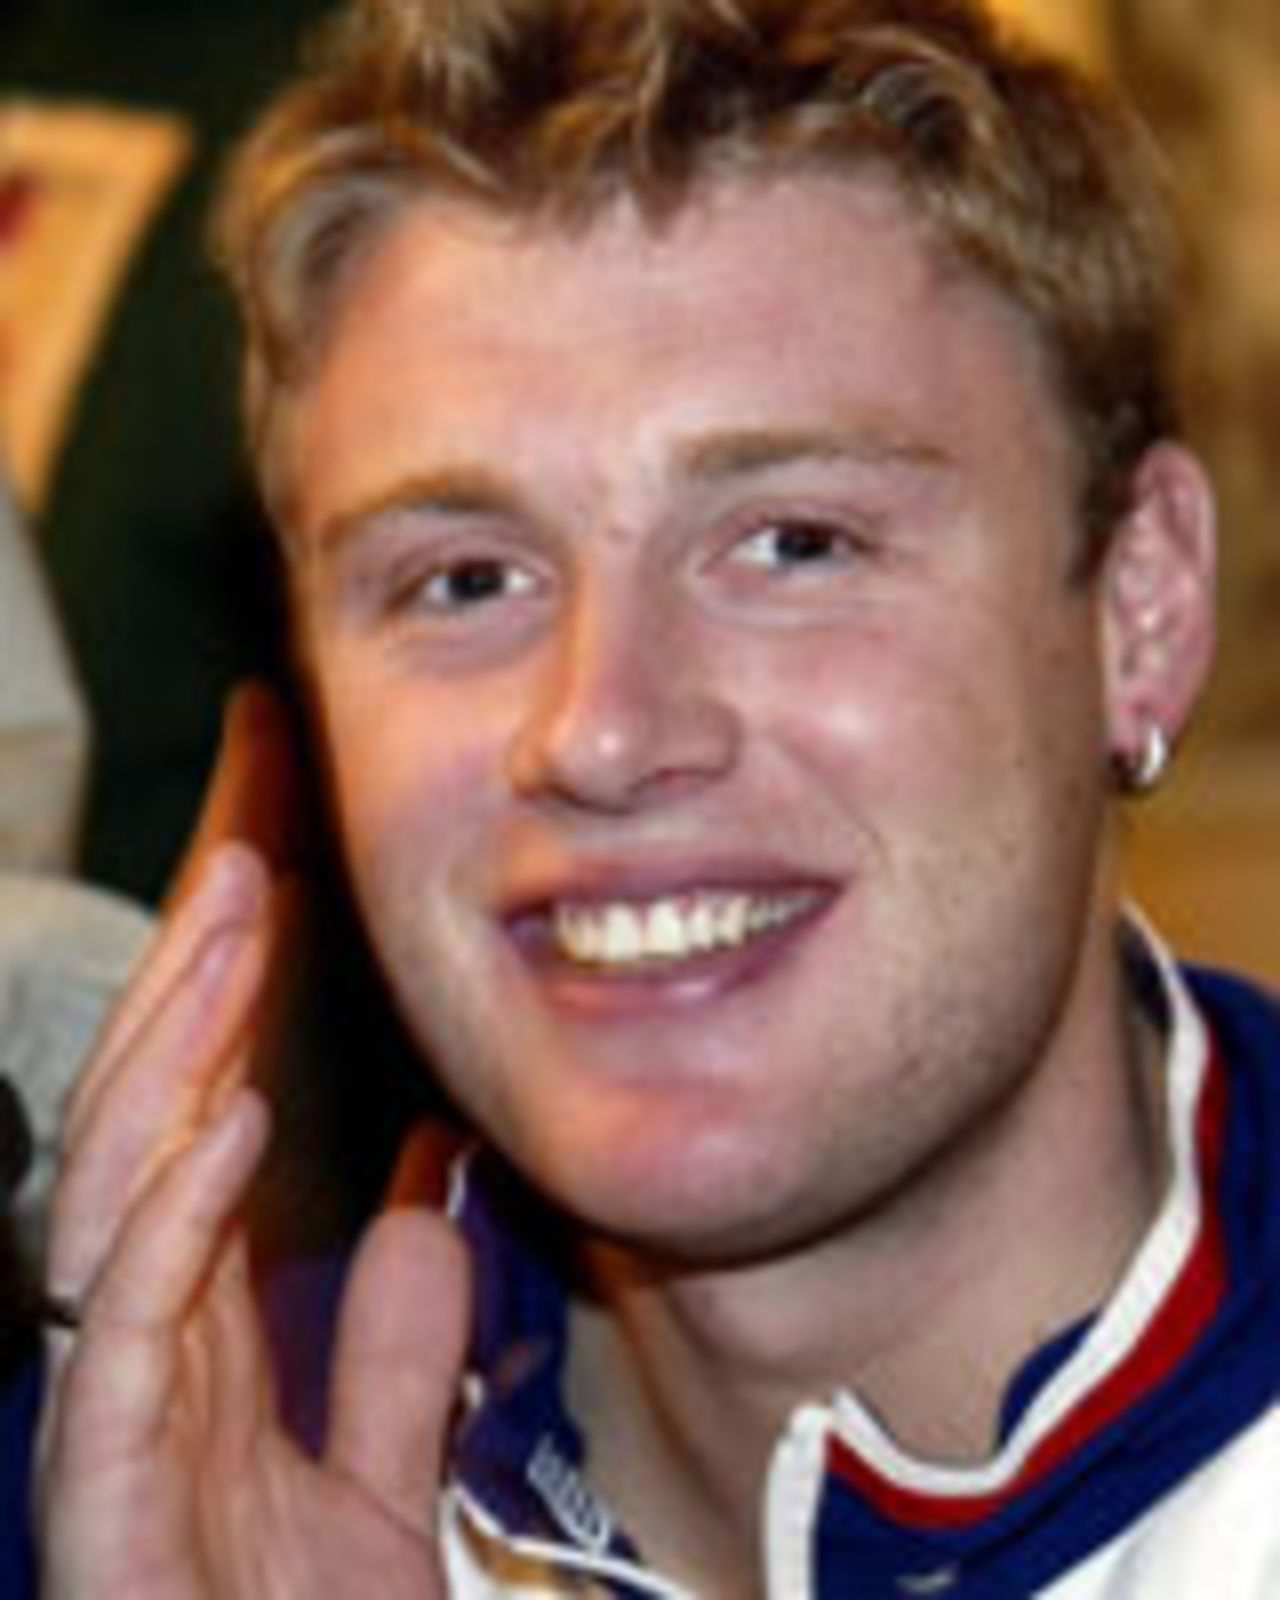 Andrew Flintoff smiling at a press conference, London, February 24, 2004